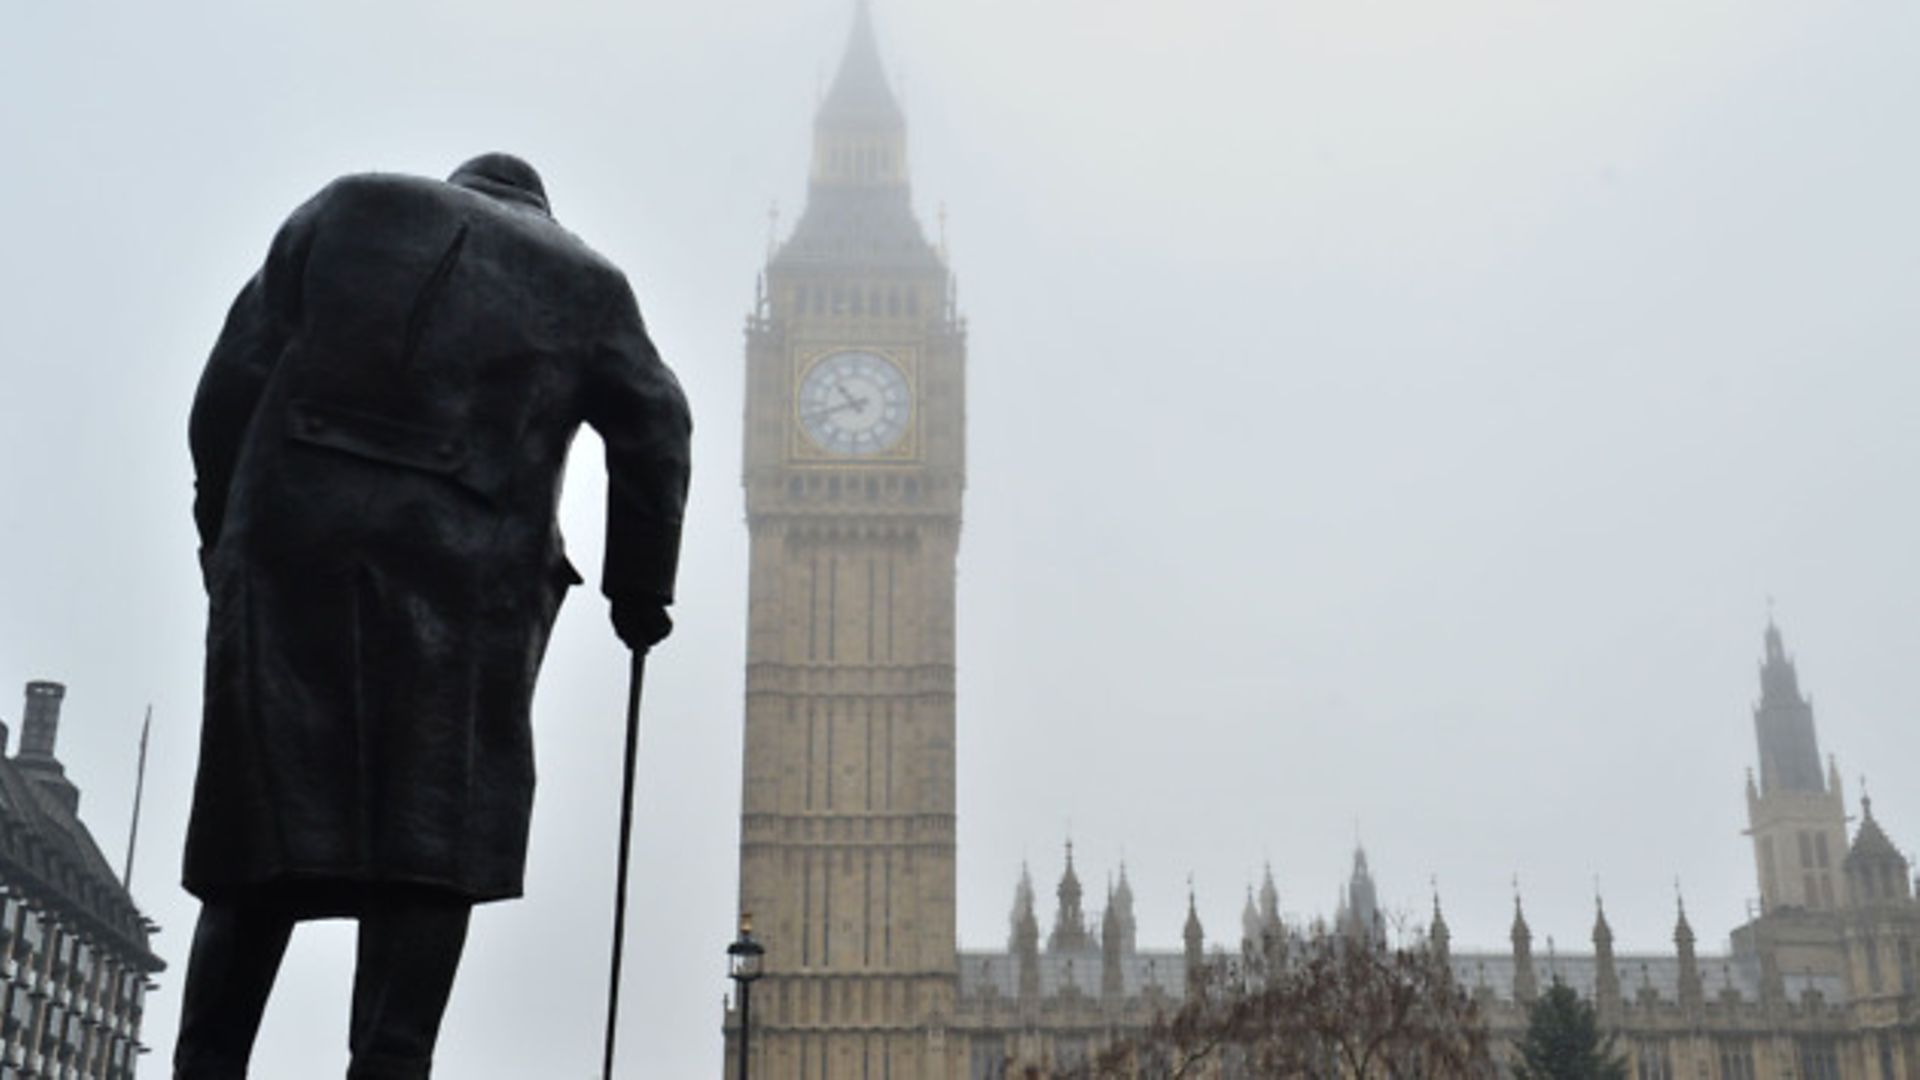 The statue of Winston Churchill in Parliament Square and the Houses of Parliament - Credit: PA Wire/PA Images